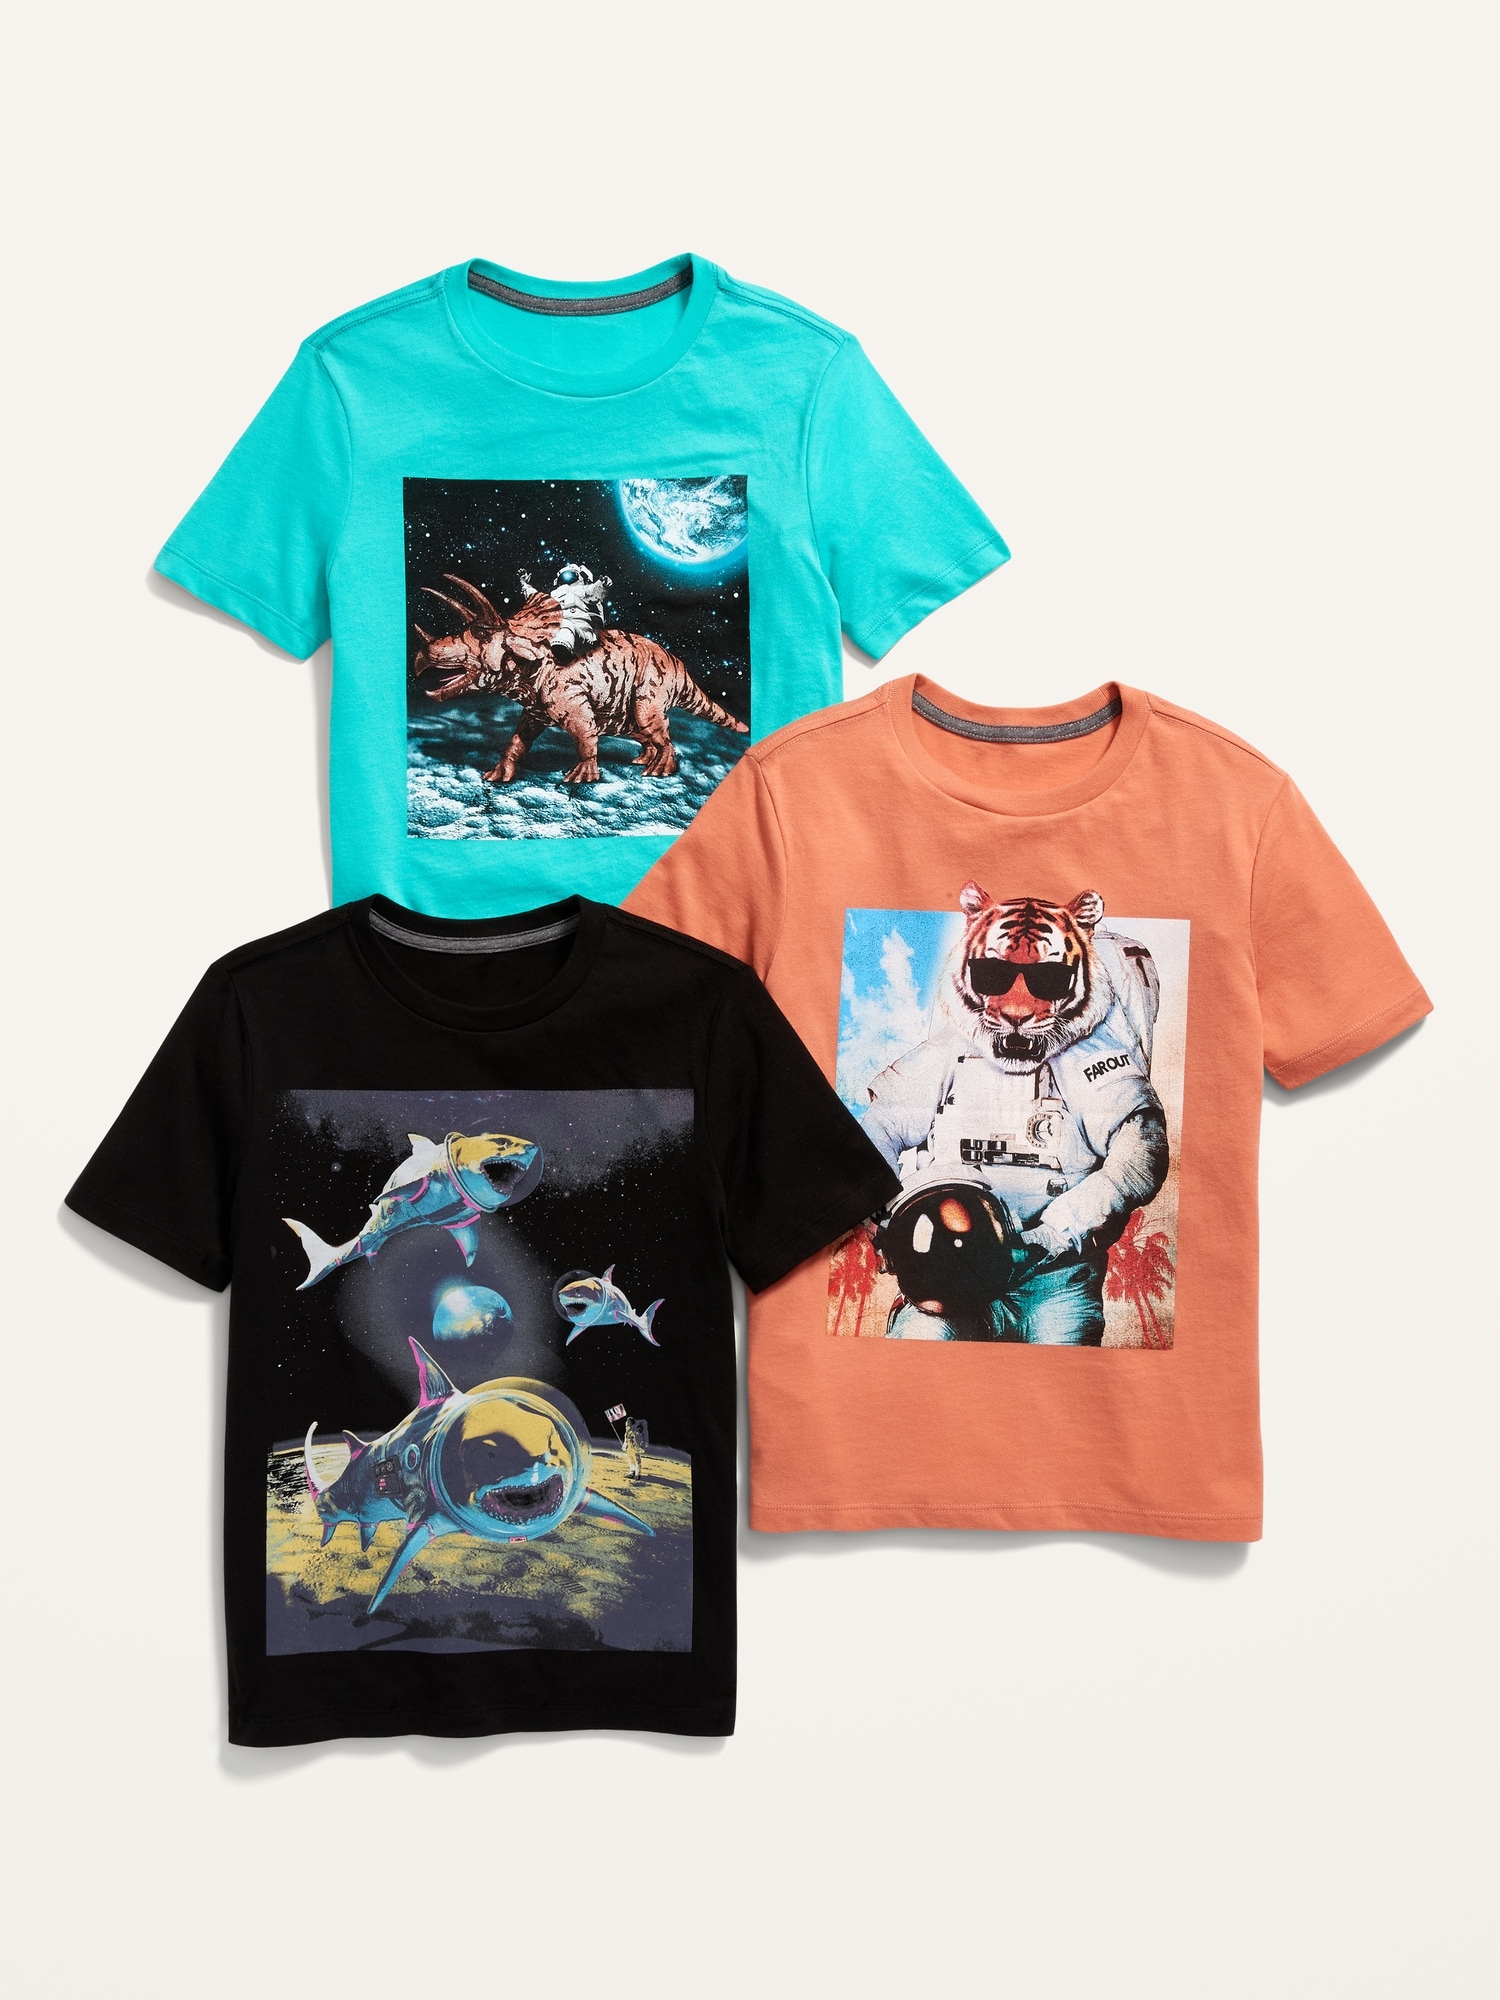 Gender-Neutral Graphic T-Shirt 3-Pack for Kids | Old Navy